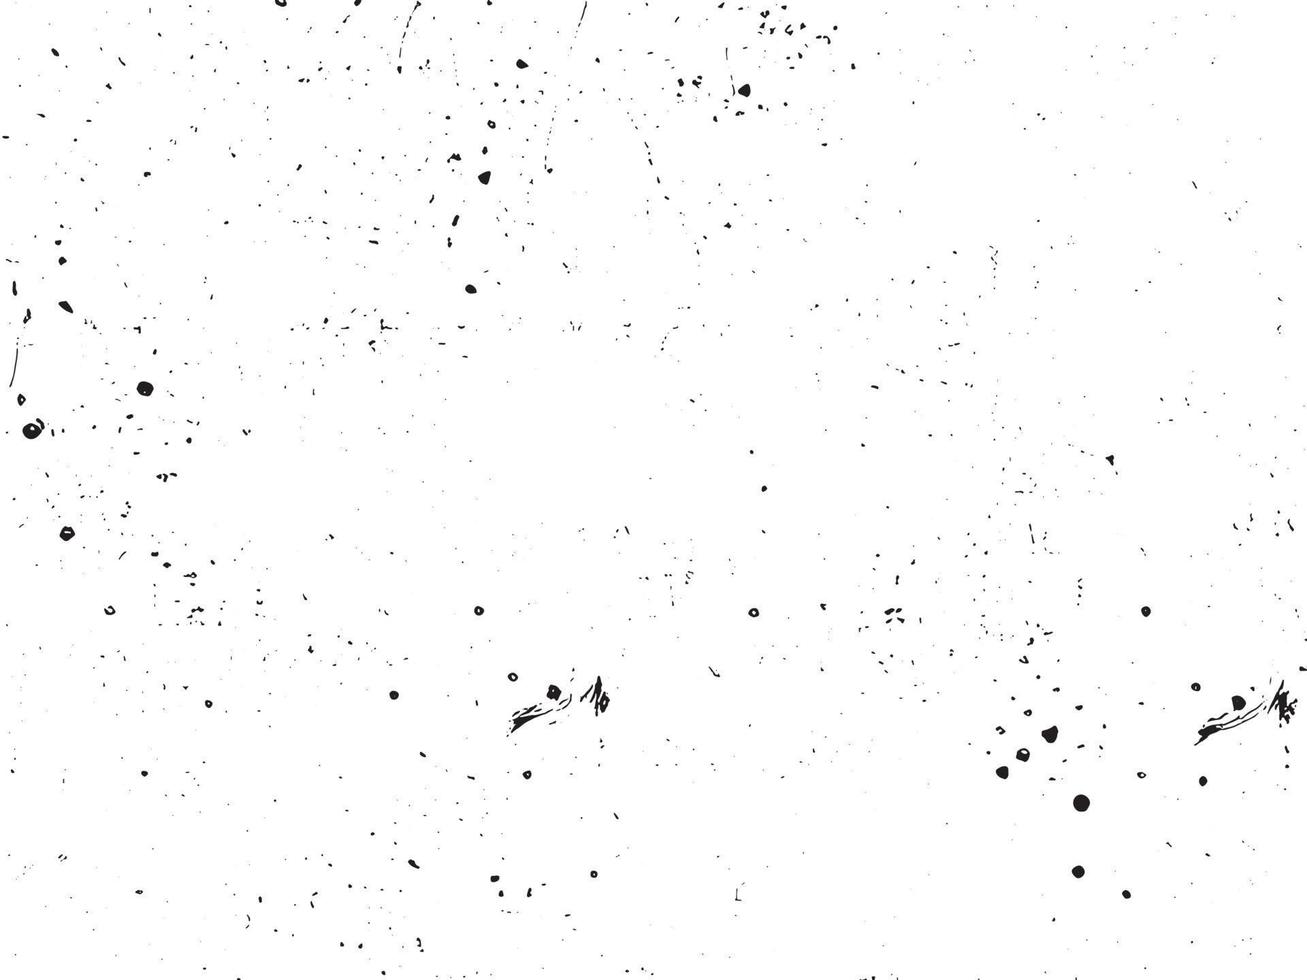 Grunge background vector illustration. Black and white messy texture with scratches and dots. Distressed overlay effect for retro design. Abstract dirty surface with empty space. EPS10.